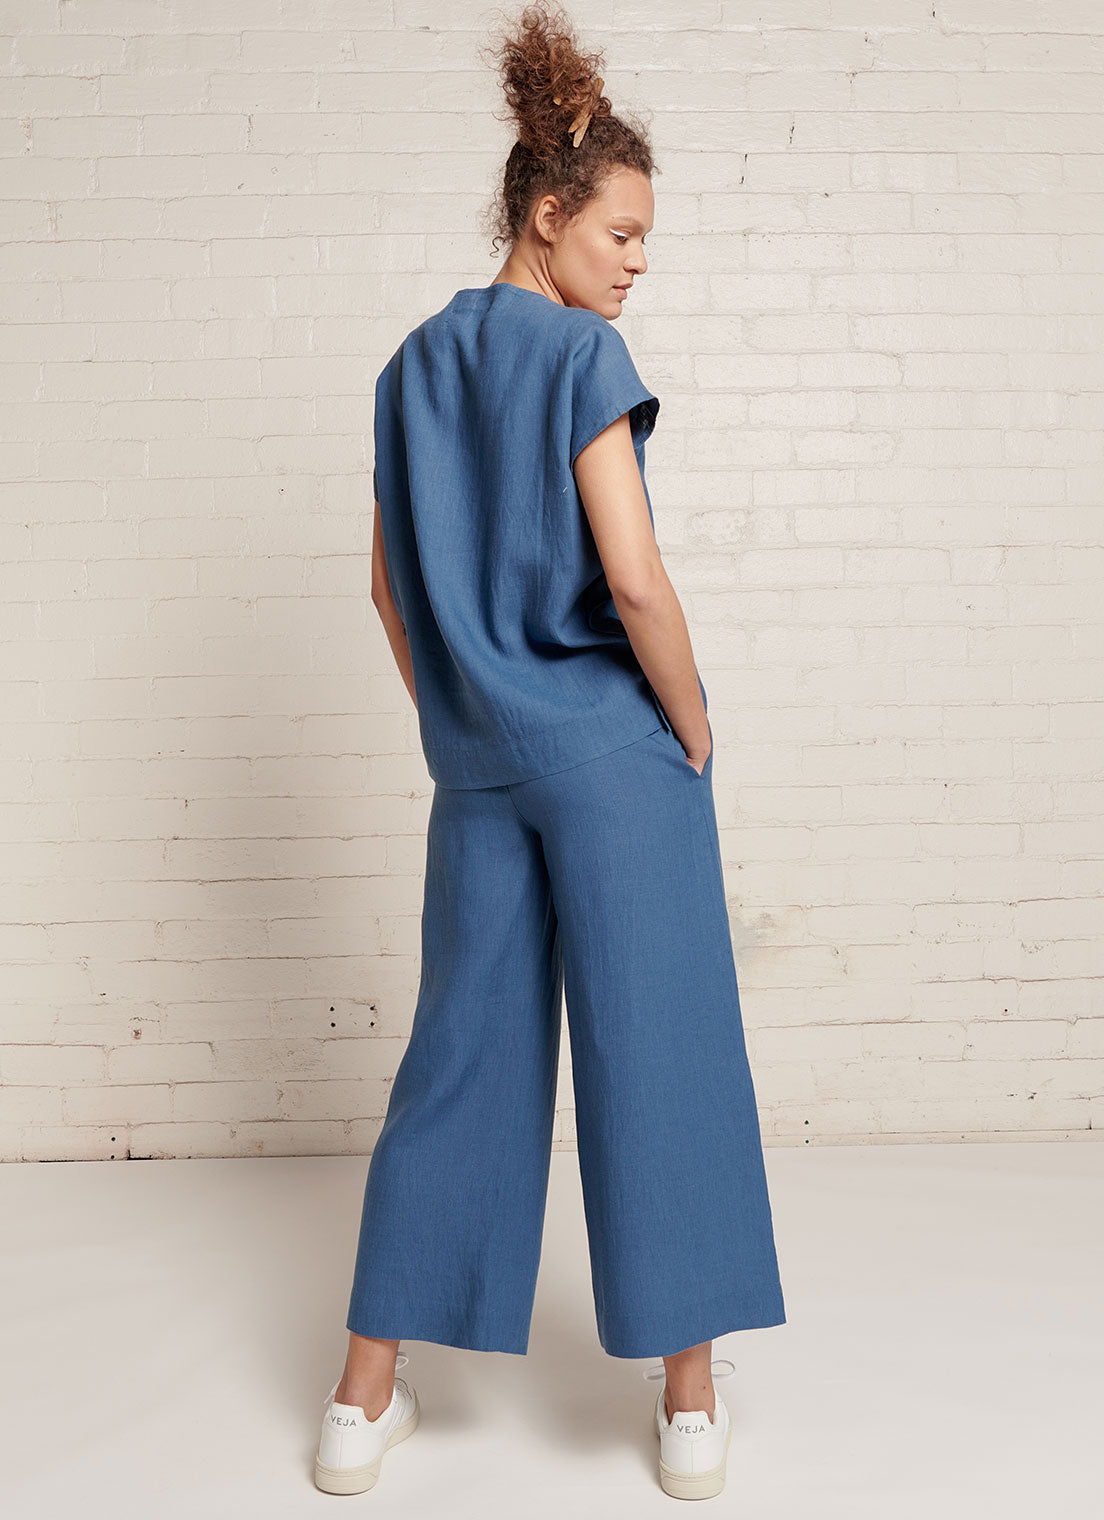 An indigo, loose fitting crop pants with elasticated waistband and tie belt of the same fabric made from yarn dye washed linen